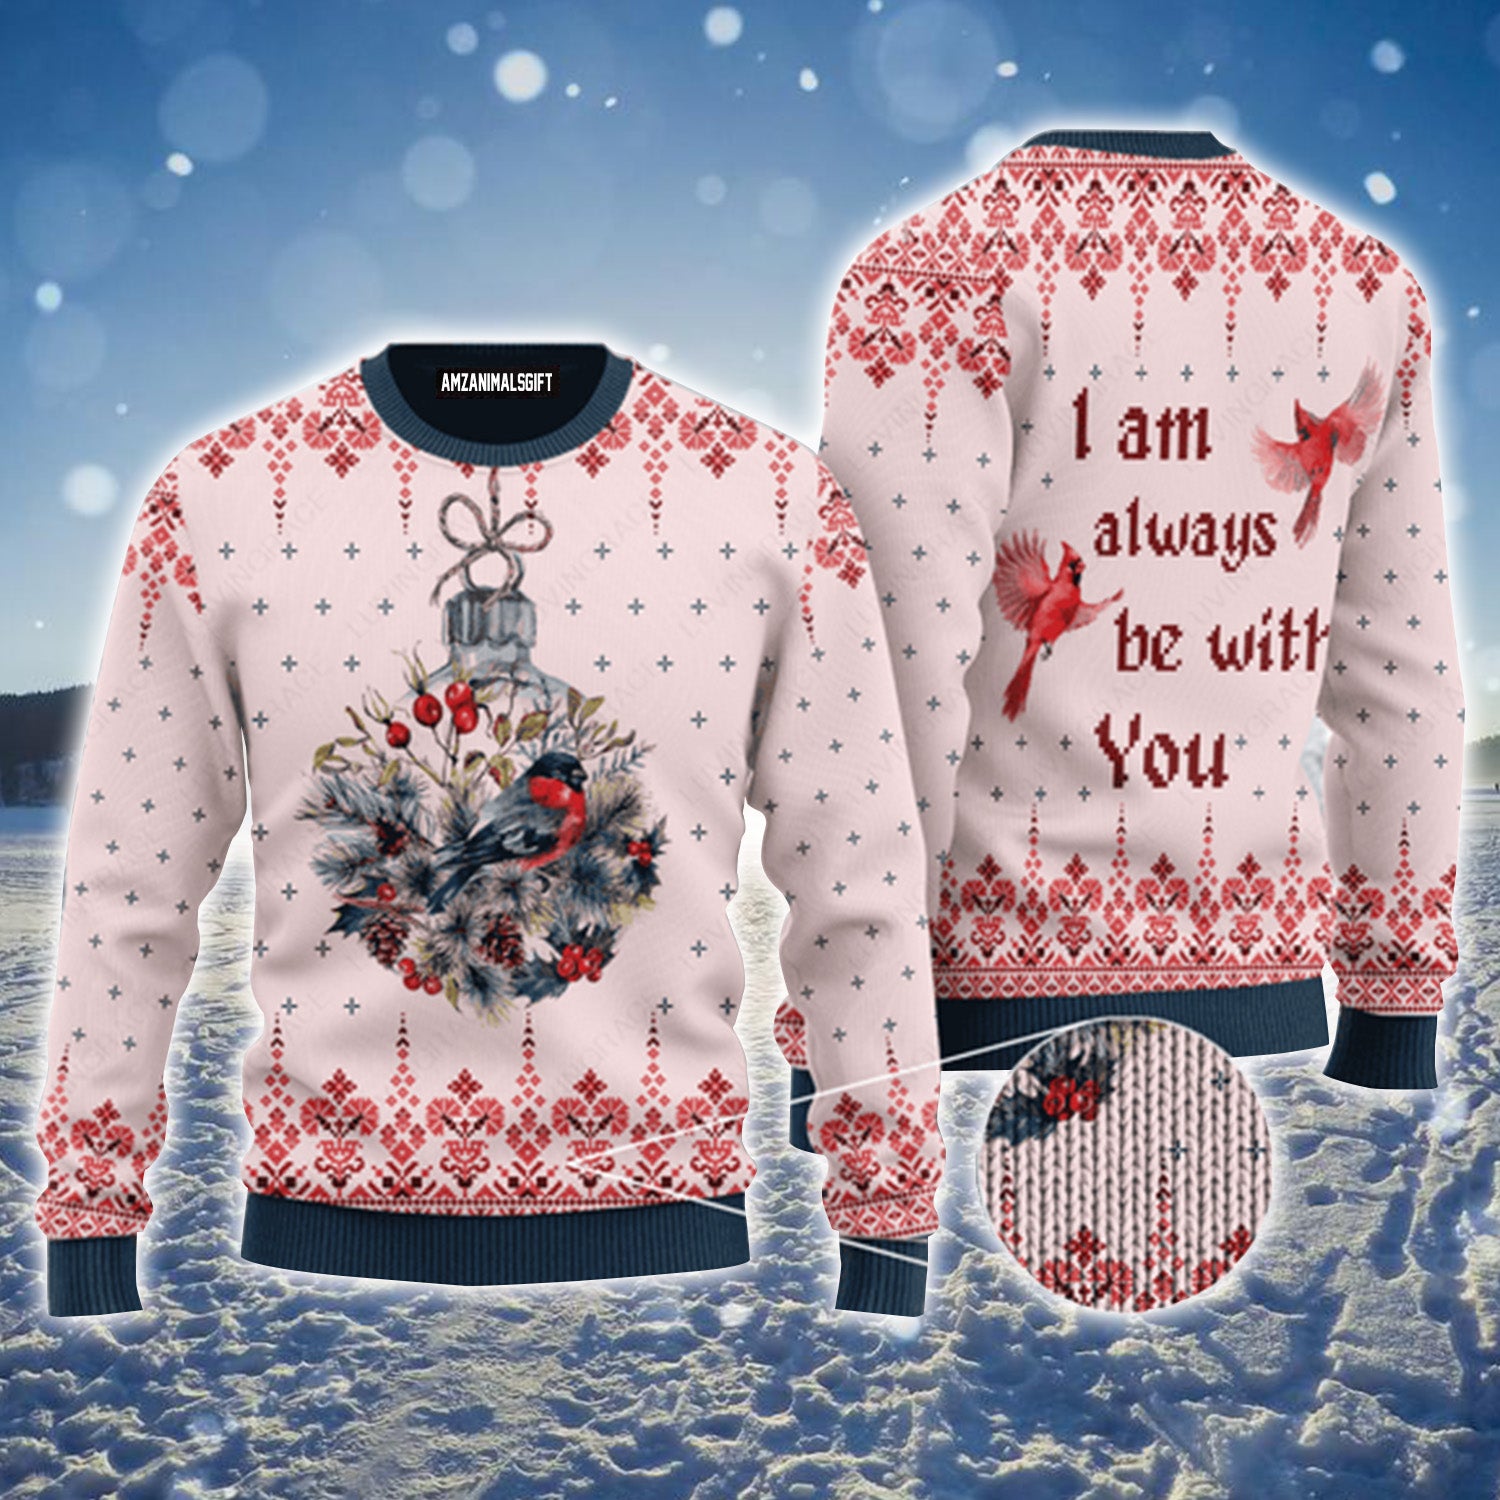 Christmas Cardinal Floral Wool Knitted Pattern Urly Sweater, Christmas Sweater For Men & Women - Perfect Gift For Christmas, New Year, Winter